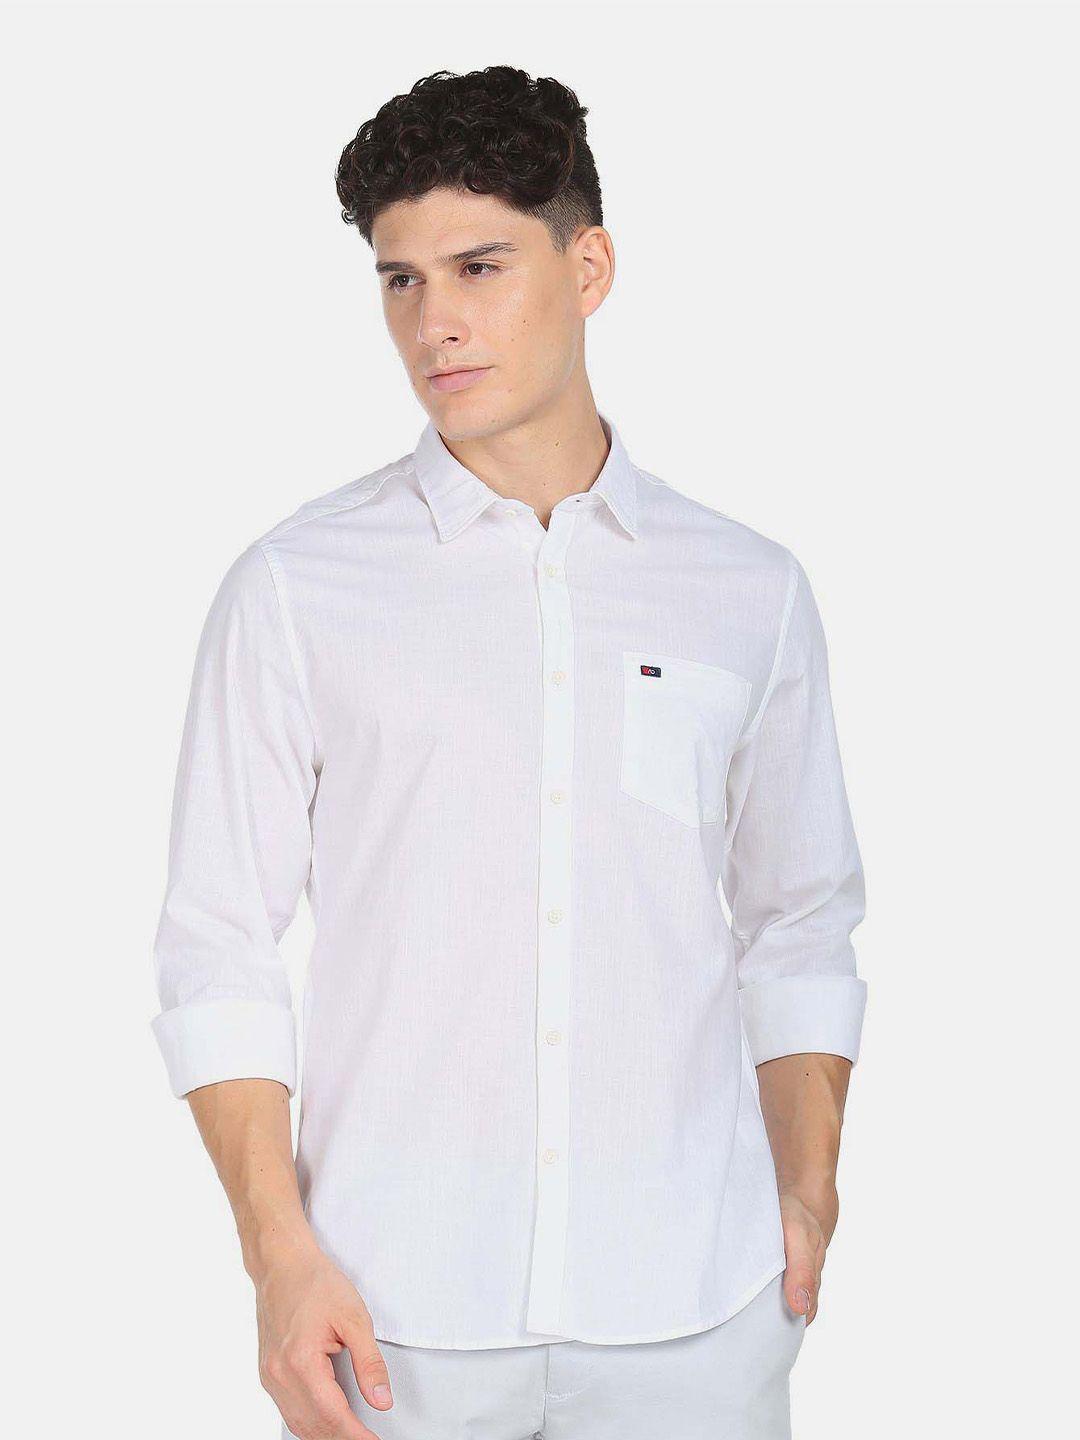 ad by arvind slim fit pure cotton casual shirt